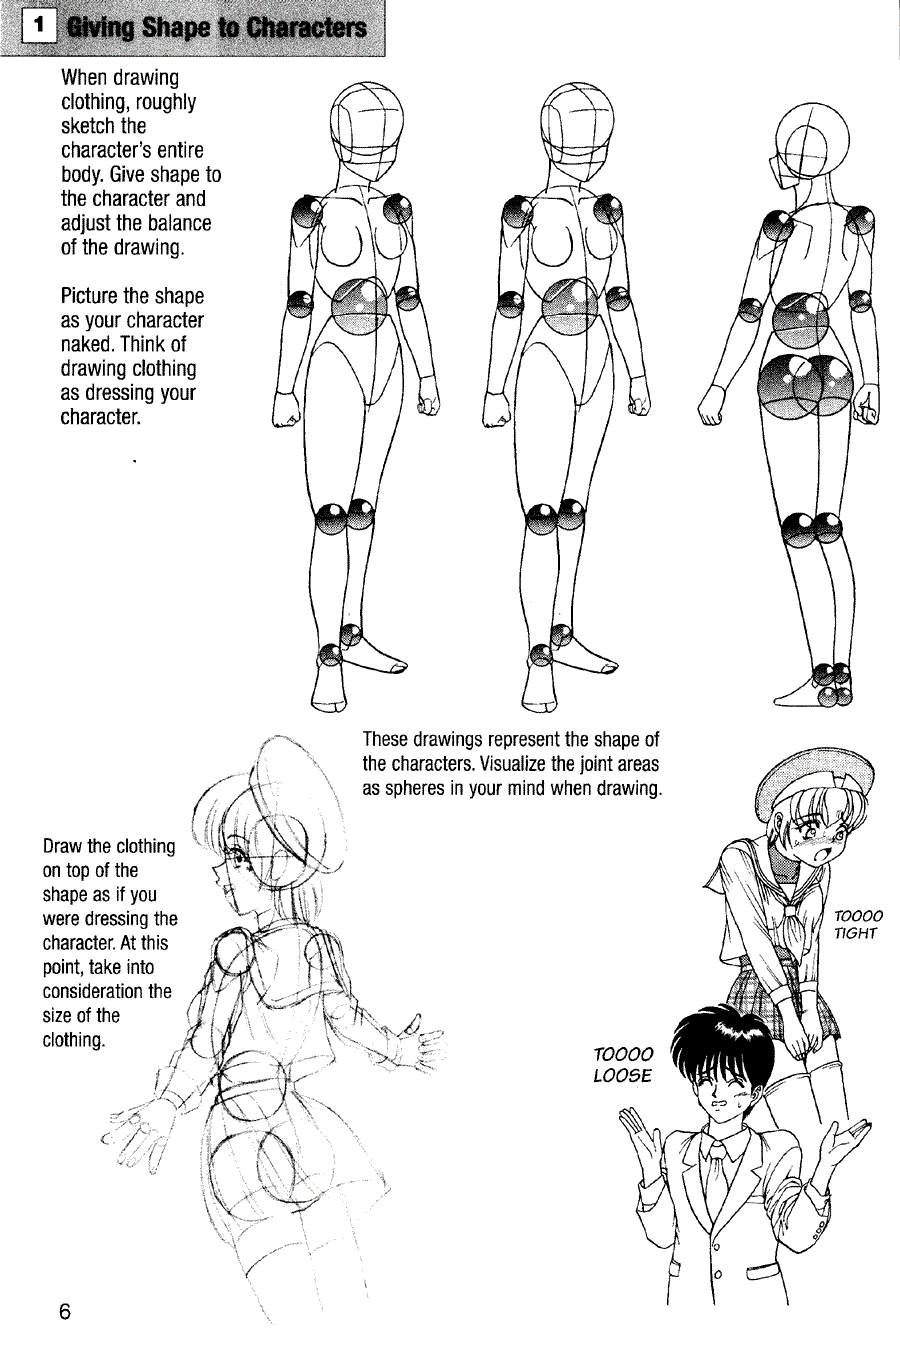 Now to draw Manga: Dressing your characters in casual wear - Now to draw Manga ></a>
<script language=JavaScript> 
  var txt = 